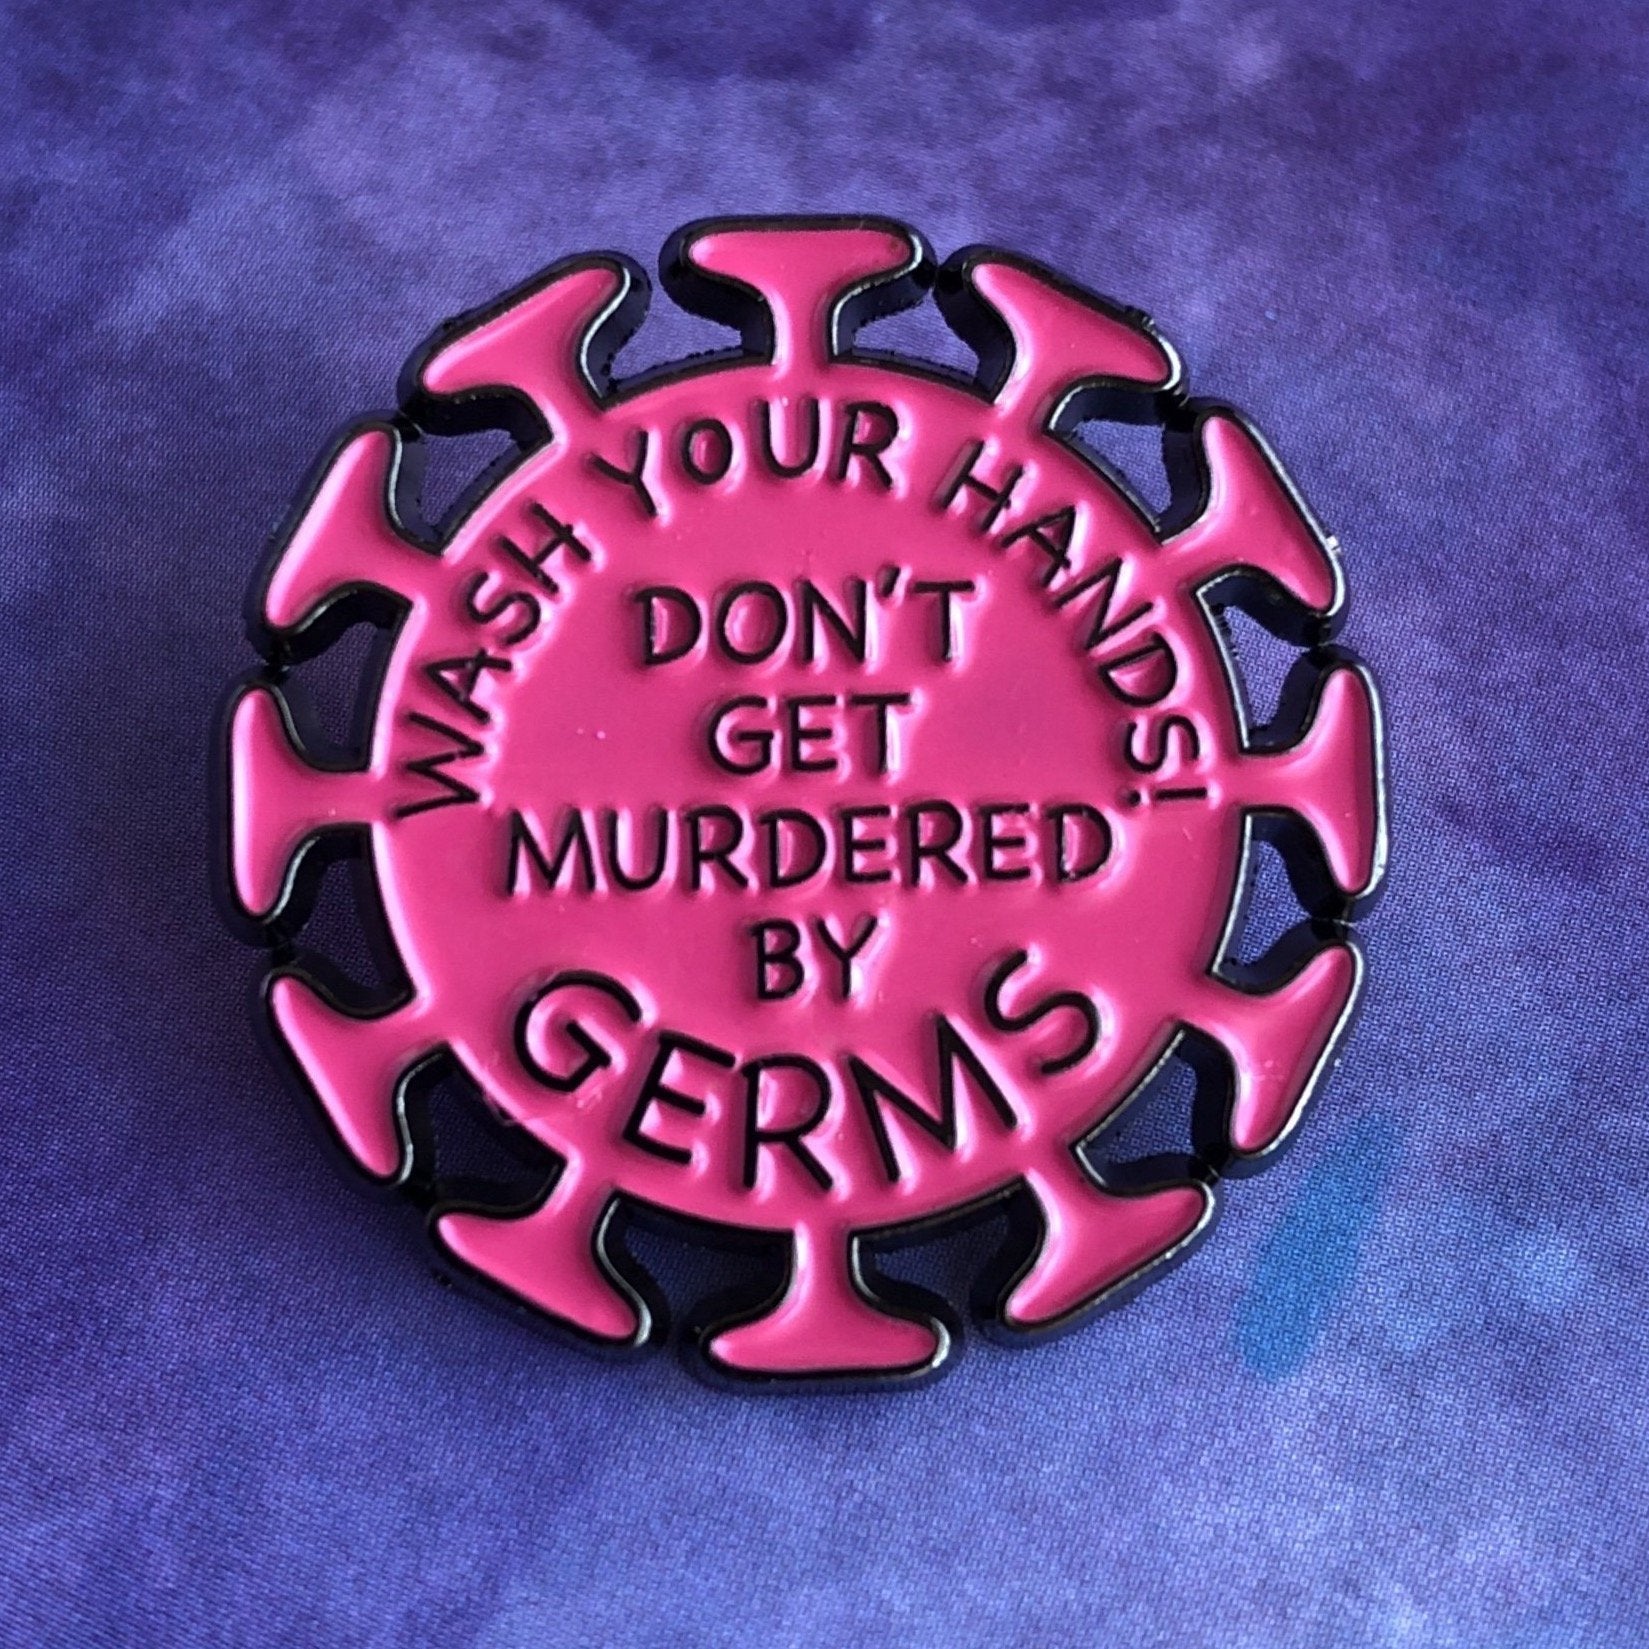 Don't Get Murdered by Germs! Pin - H1N1 "Swine Flu" Edition - Rad Girl Creations